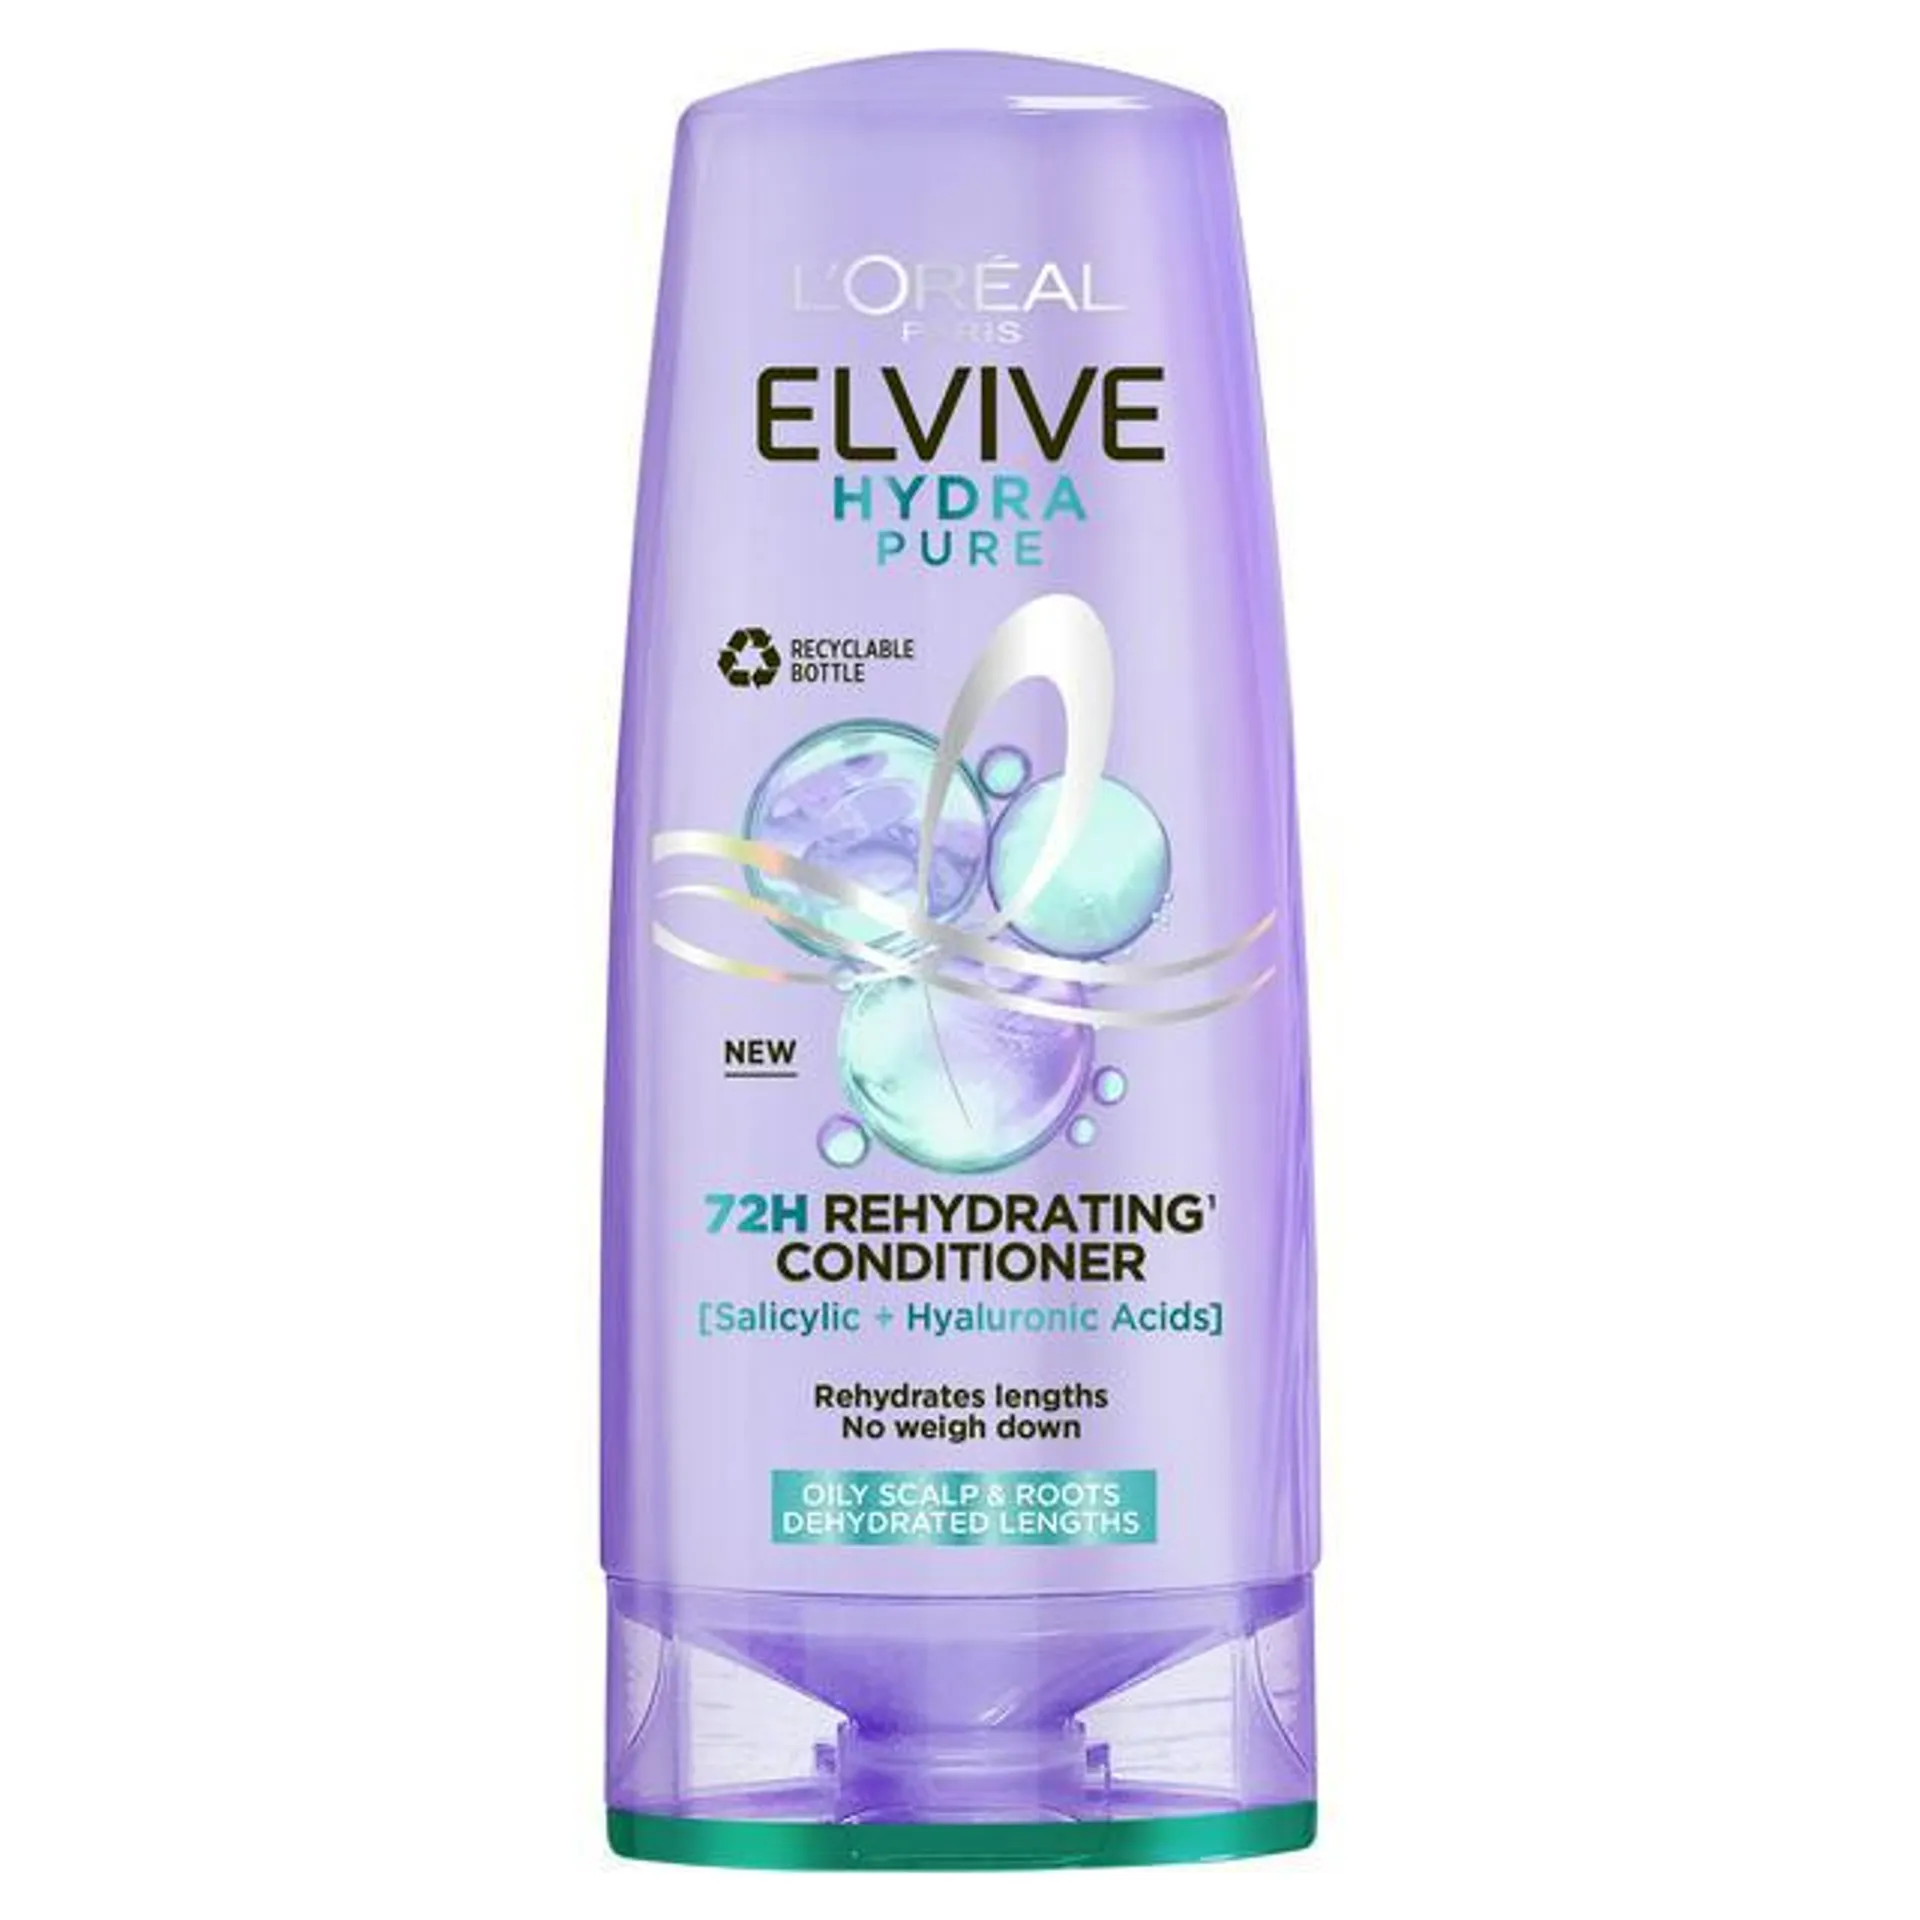 L'Oréal Paris Elvive Hydra Pure 72h Rehydrating Conditioner with Hyaluronic & Salicylic Acids 300ml